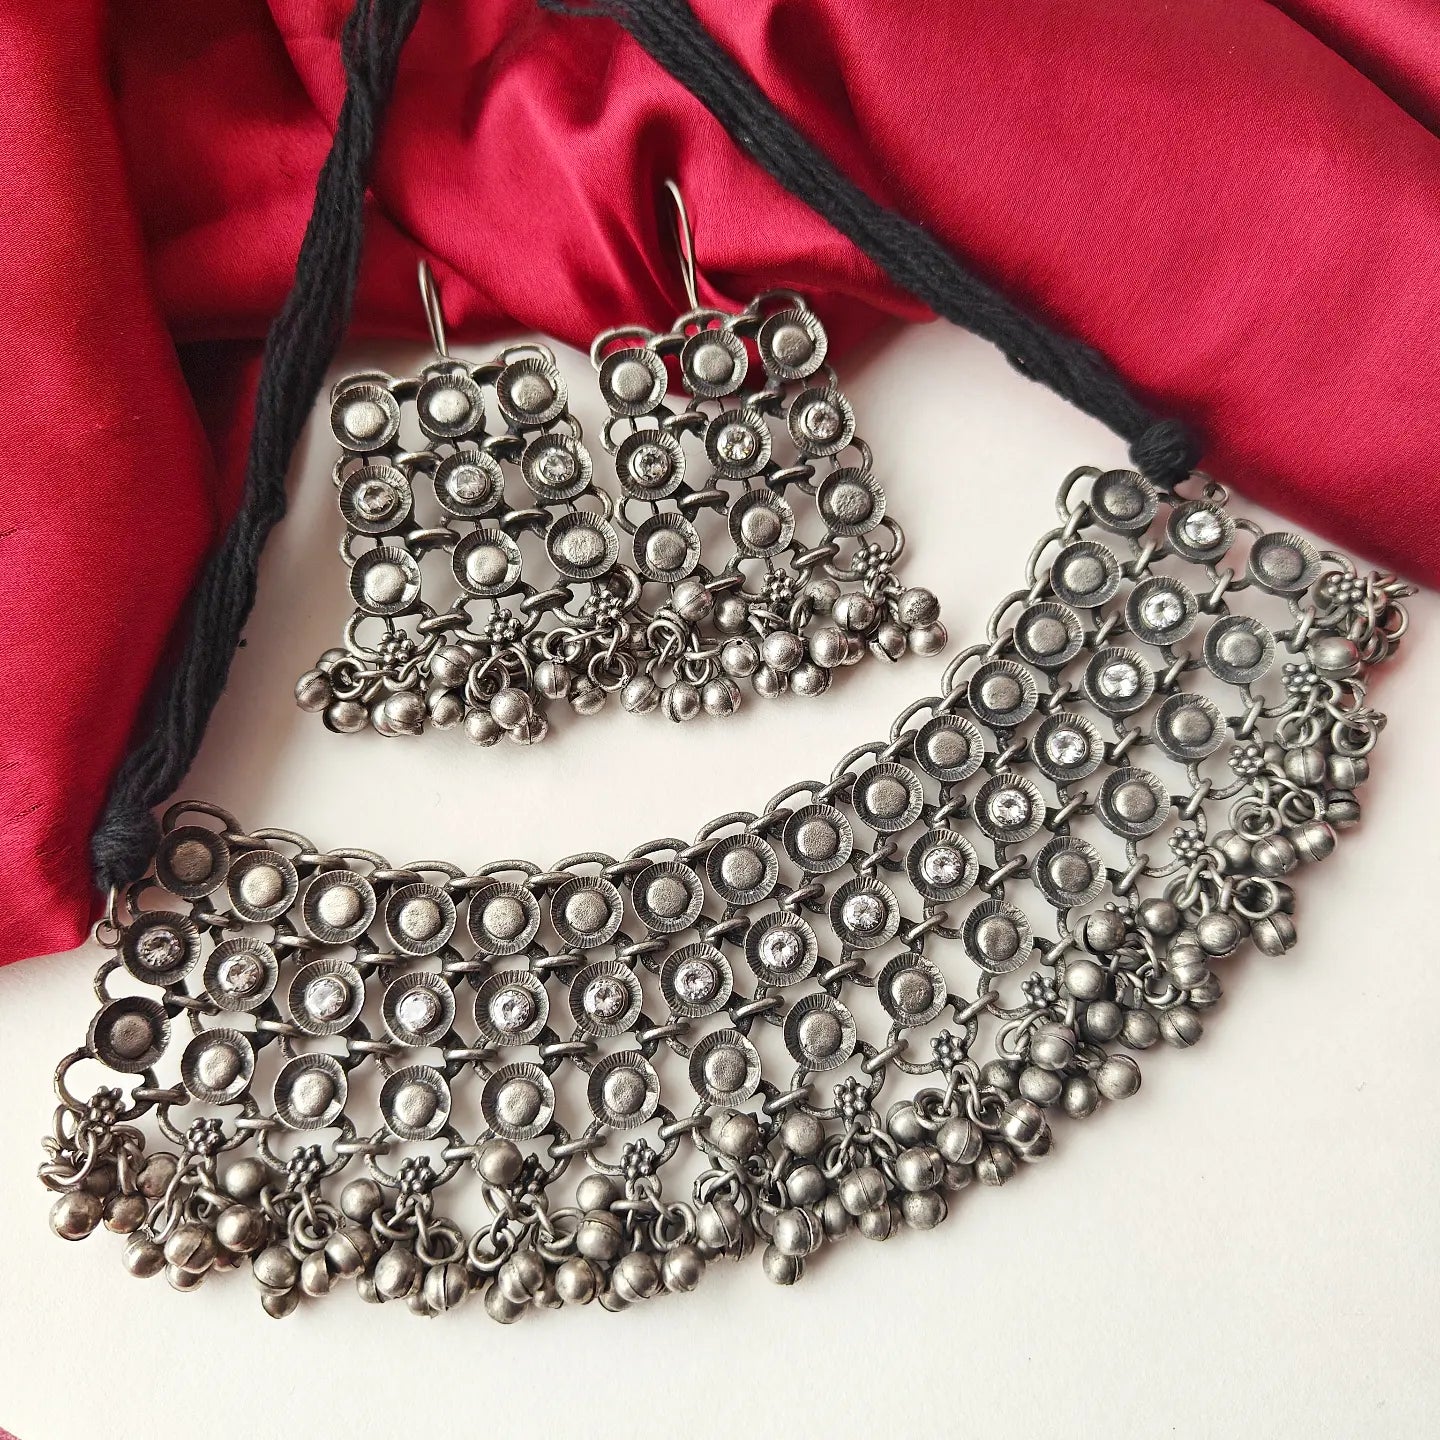 Veera Vintage Silver Afghani Necklace Set with Earrings